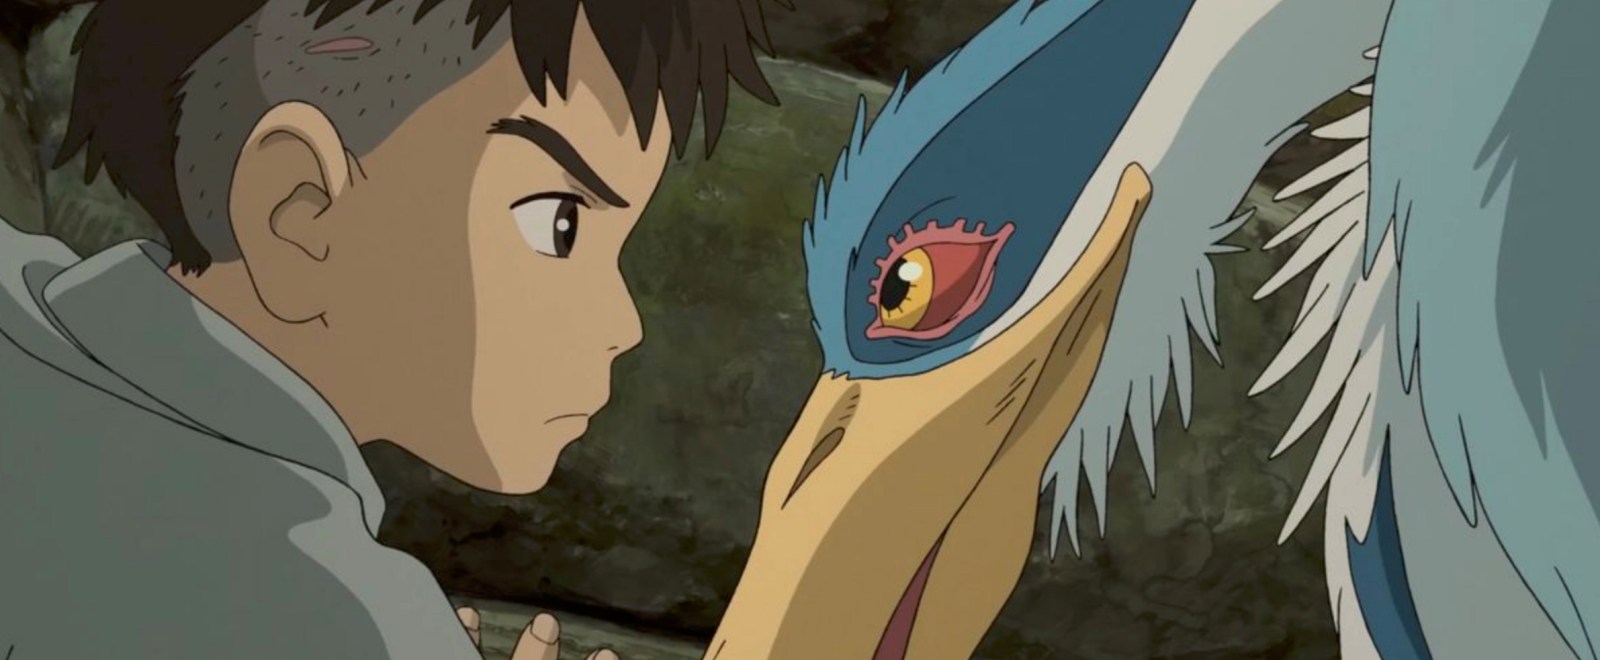 When And Where Will ‘The Boy And The Heron’ Be Streaming?